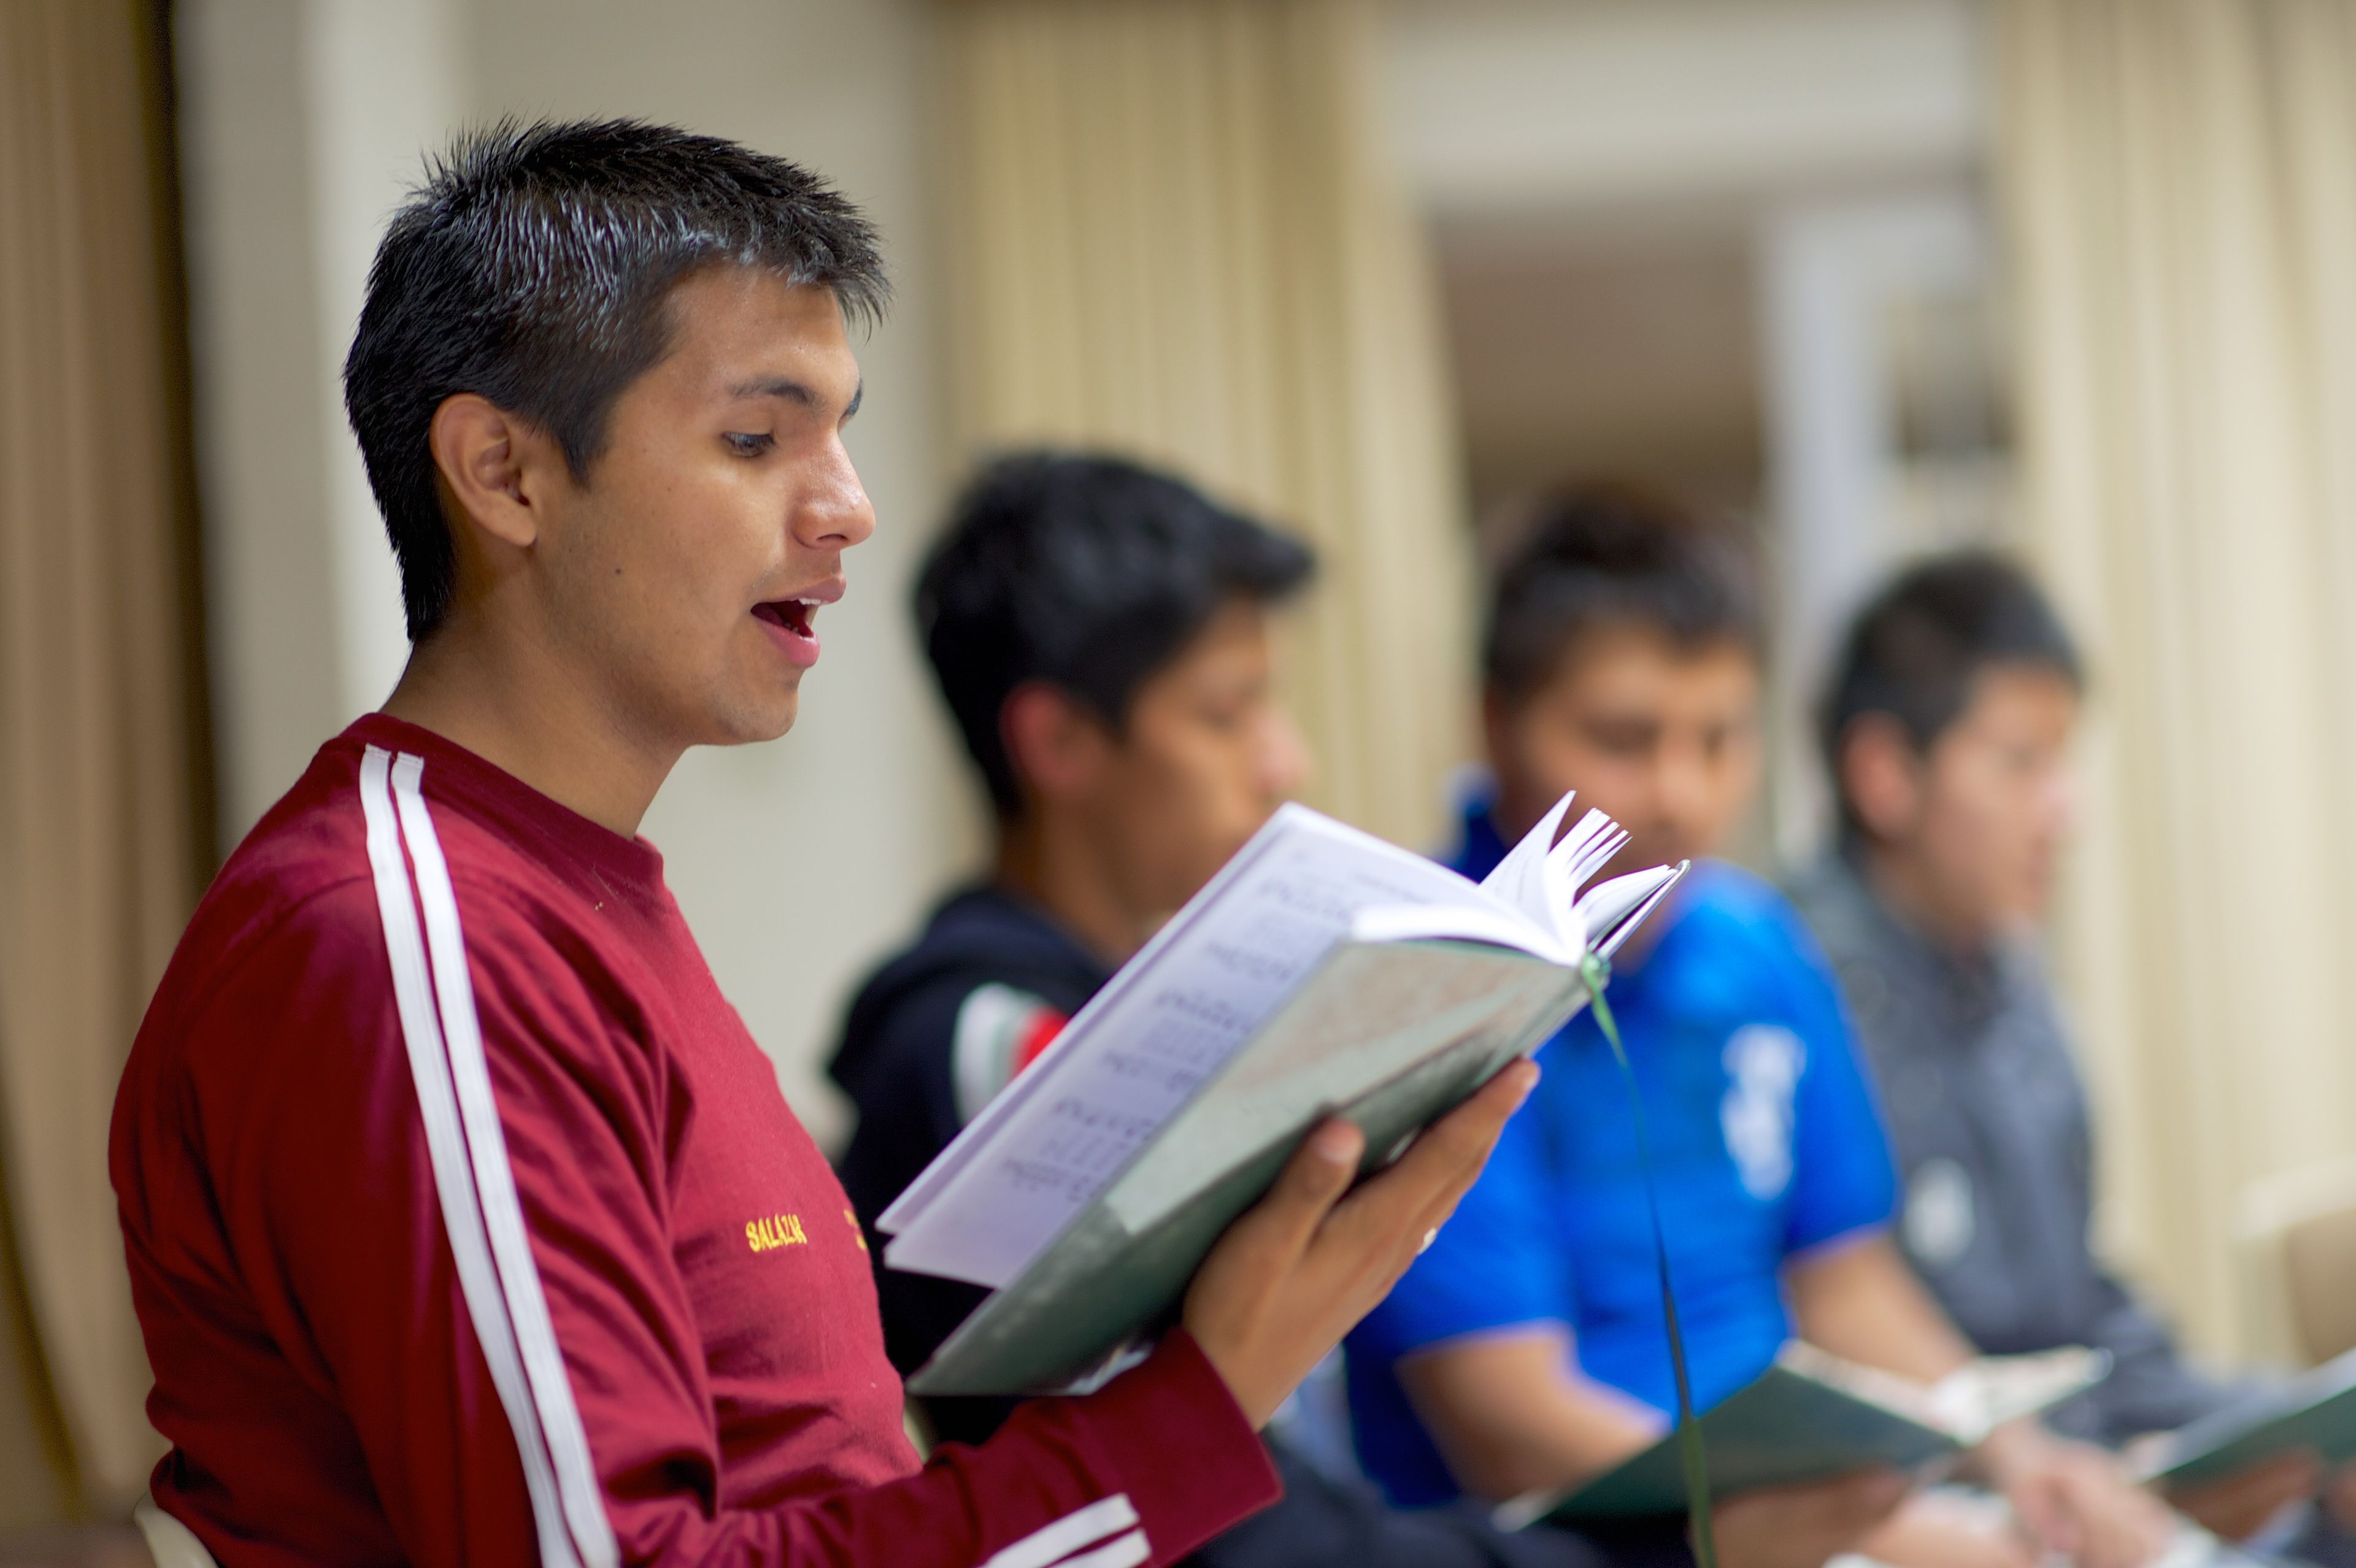 A group of young men in Peru sing from a hymnbook during a Mutual activity.